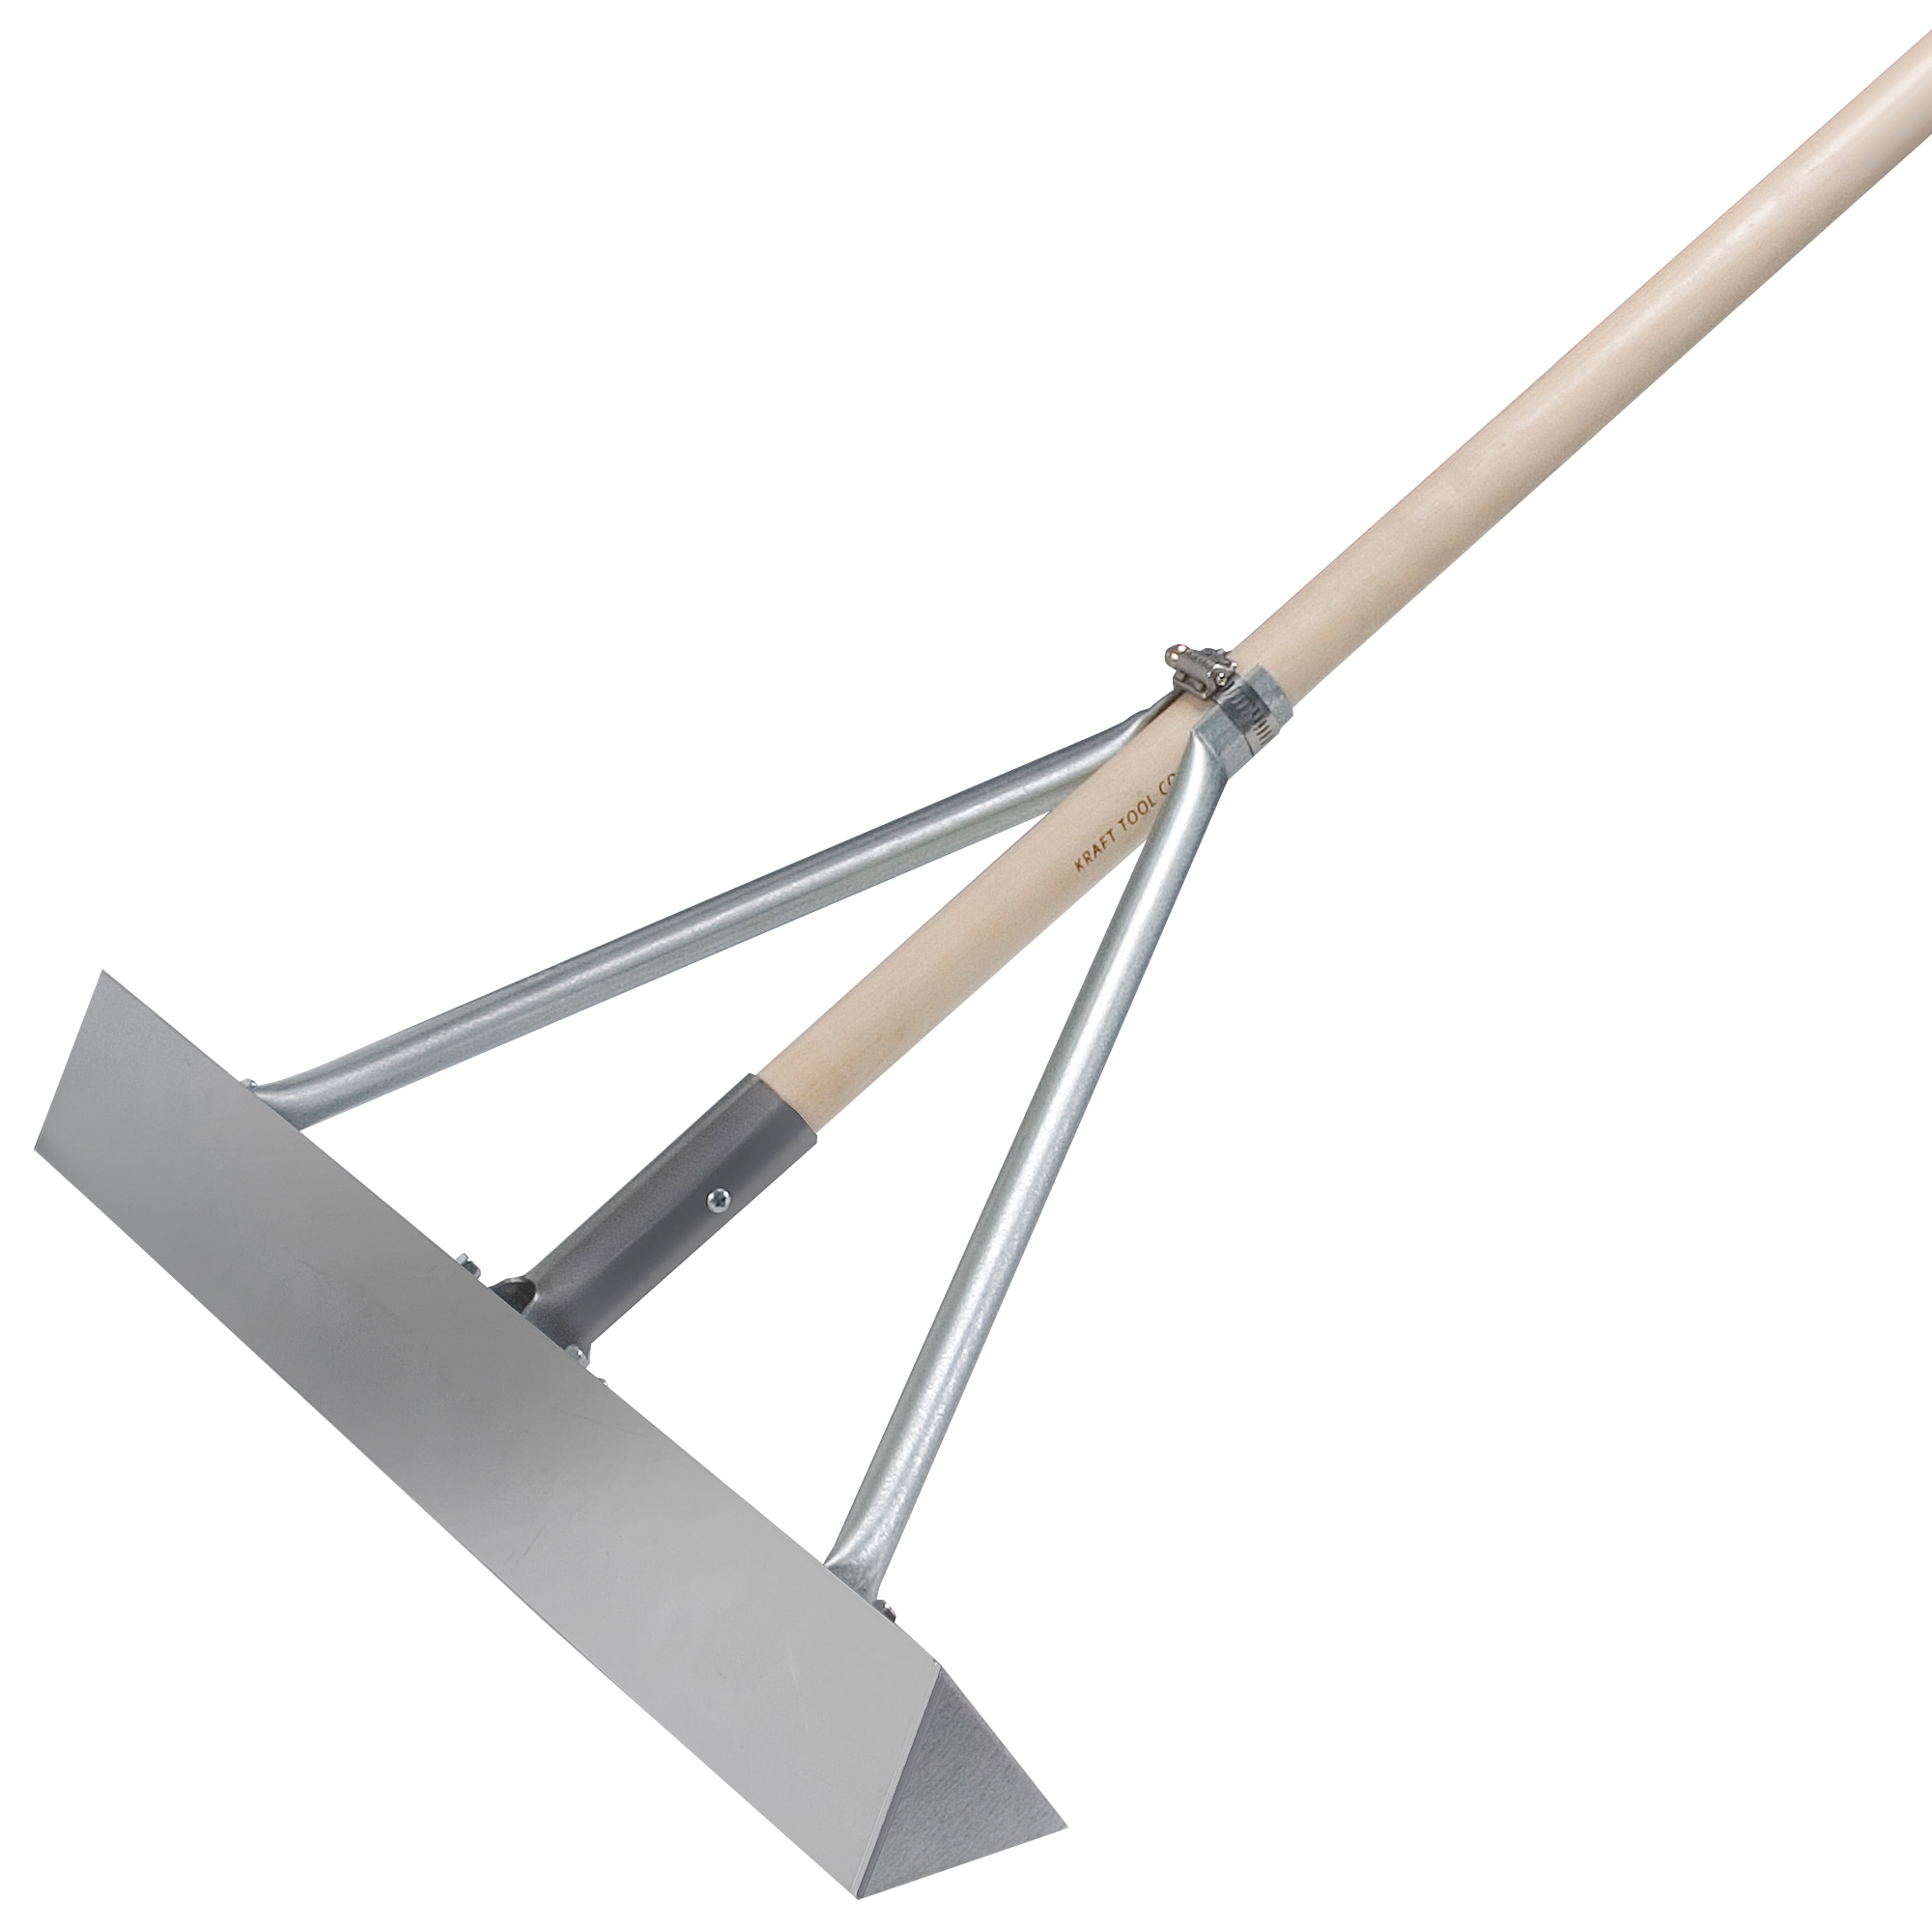 Level Up Your Lawn With A Leveling Rake - akioneo